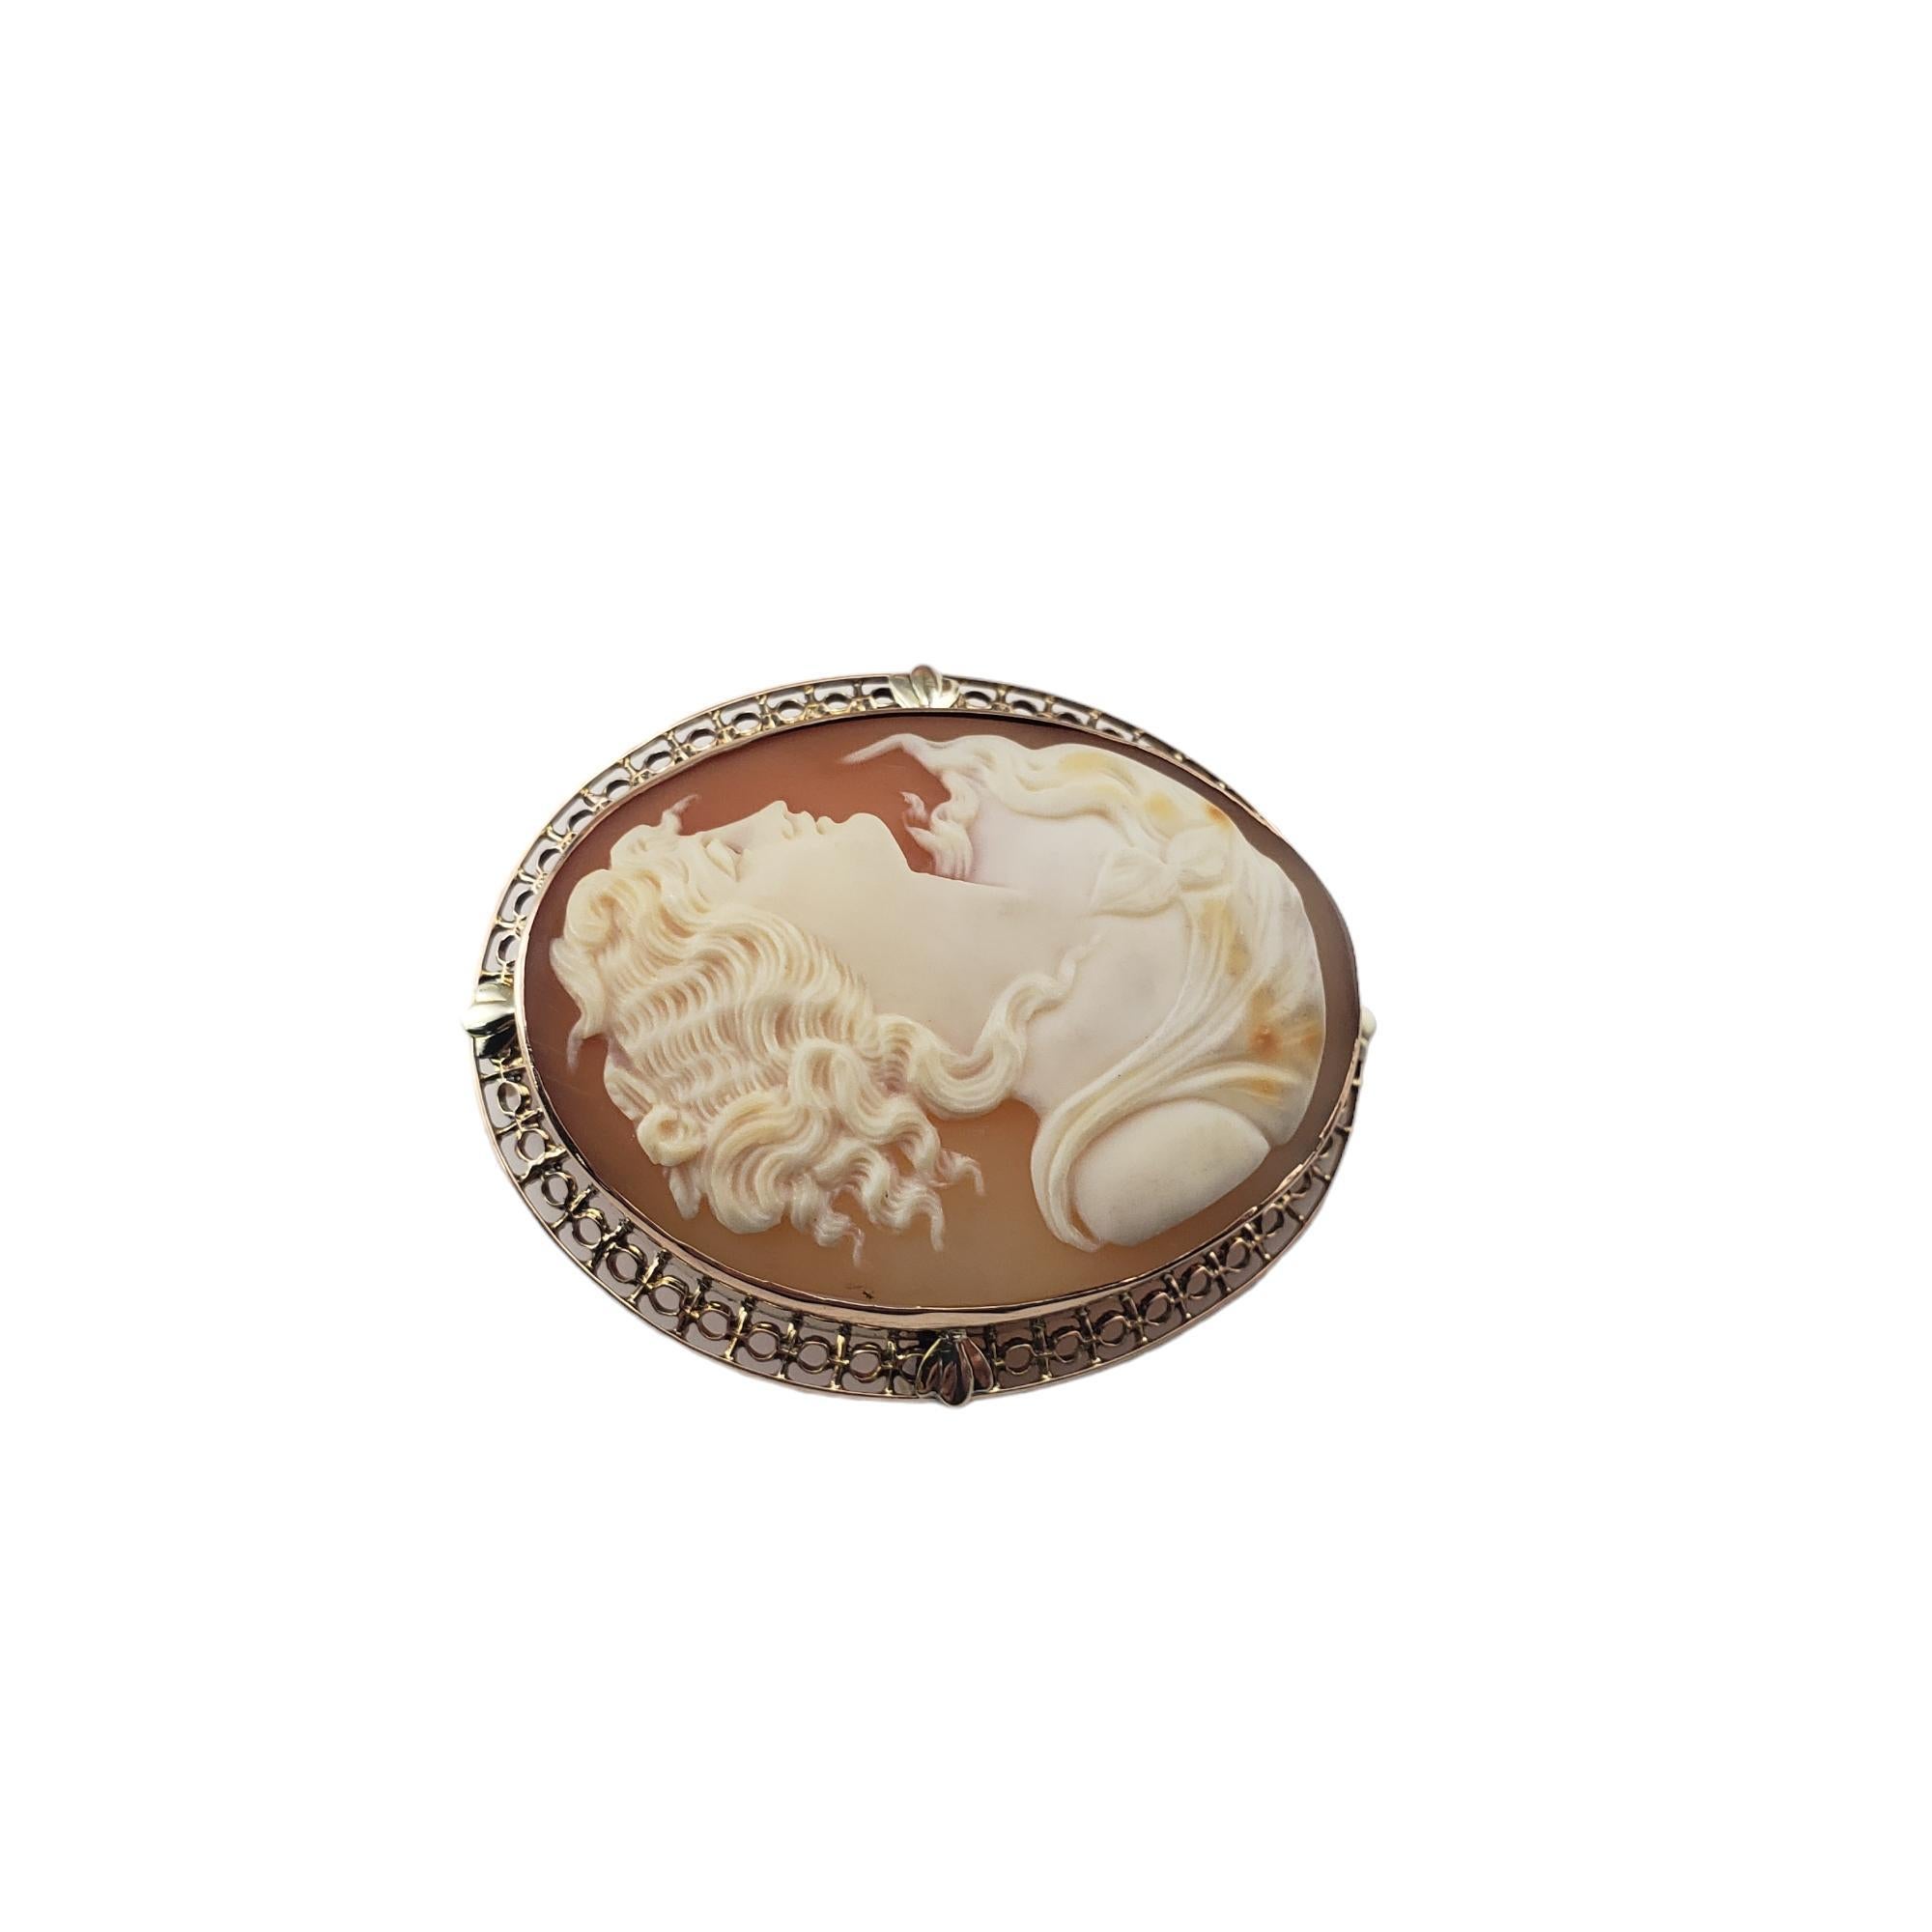 Vintage 10K Yellow Gold Cameo Brooch/Pendant-

This elegant cameo features a lovely lady in profile set in beautifully detailed 10K yellow gold.  Can be worn as a brooch or a pendant.

Size: 46 mm x 37 mm

Tested 10K gold.

Weight: 10.7 gr./ 6.9